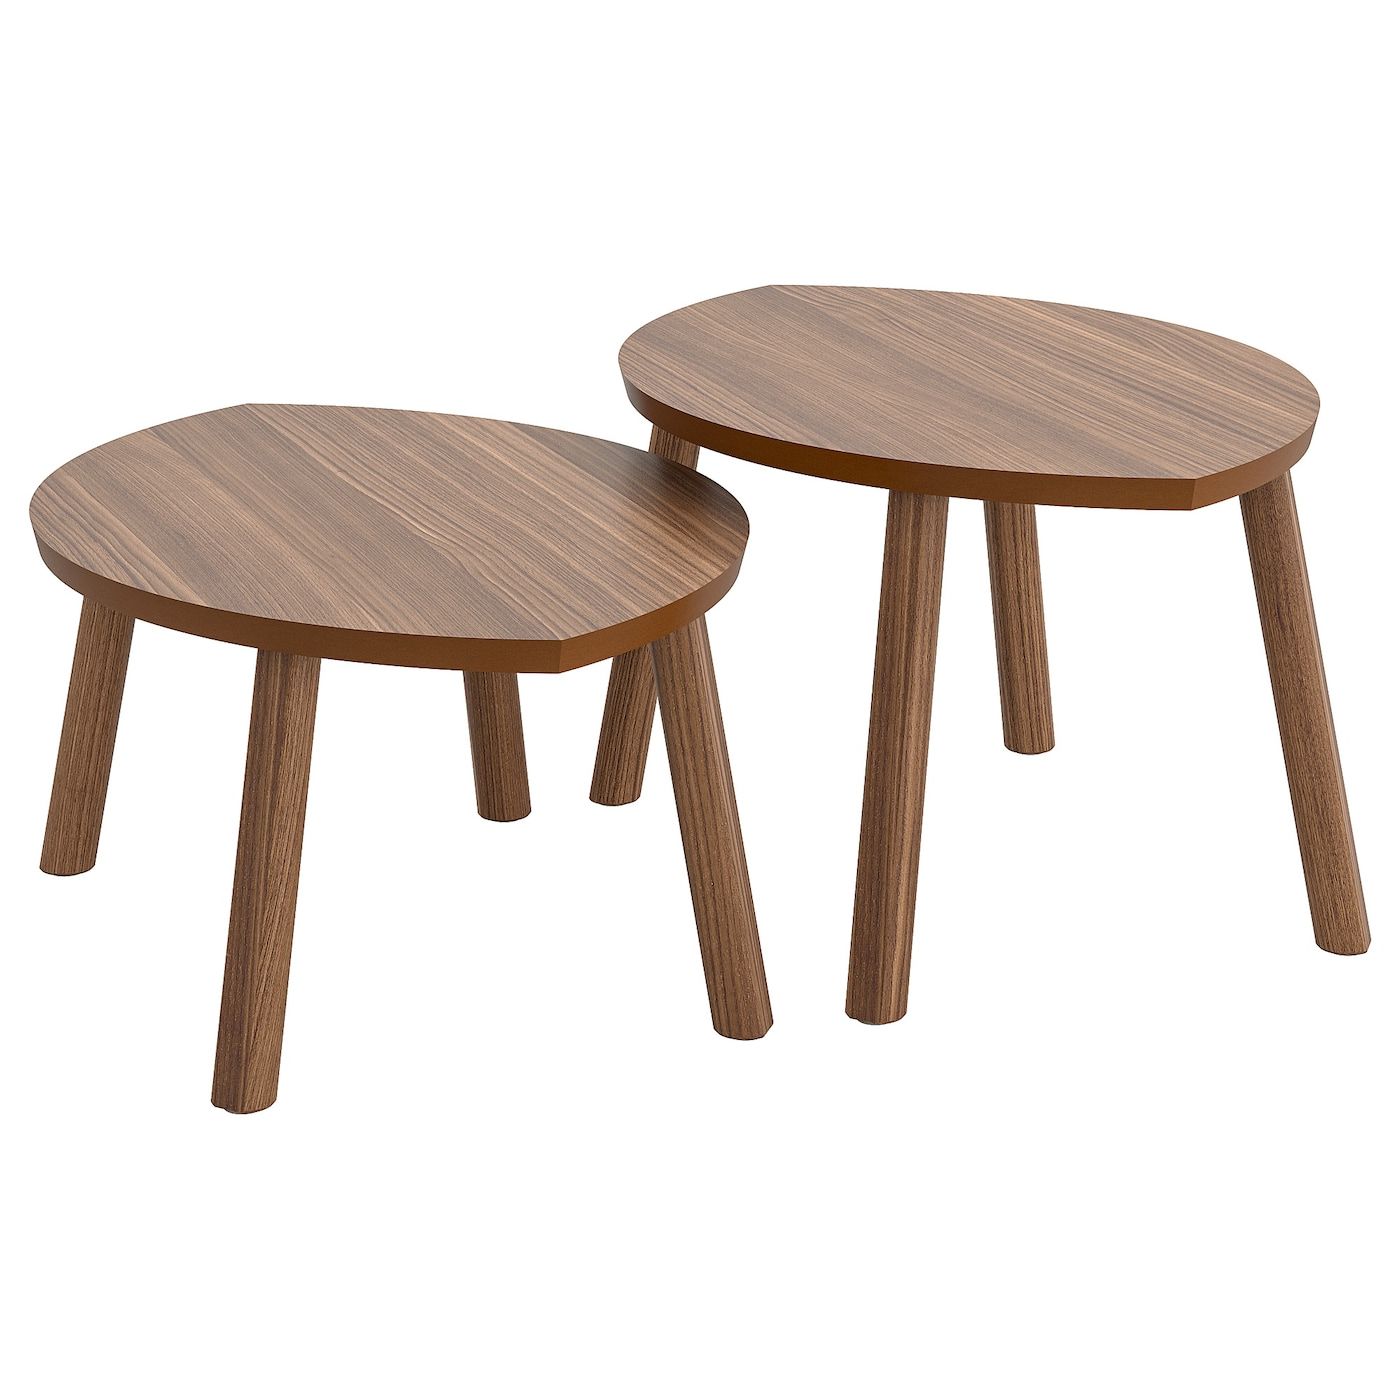 Warm Walnut Outdoor Tables With Regard To Famous Stockholm Nest Of Tables, Set Of 2, Walnut Veneer – Ikea (View 15 of 15)